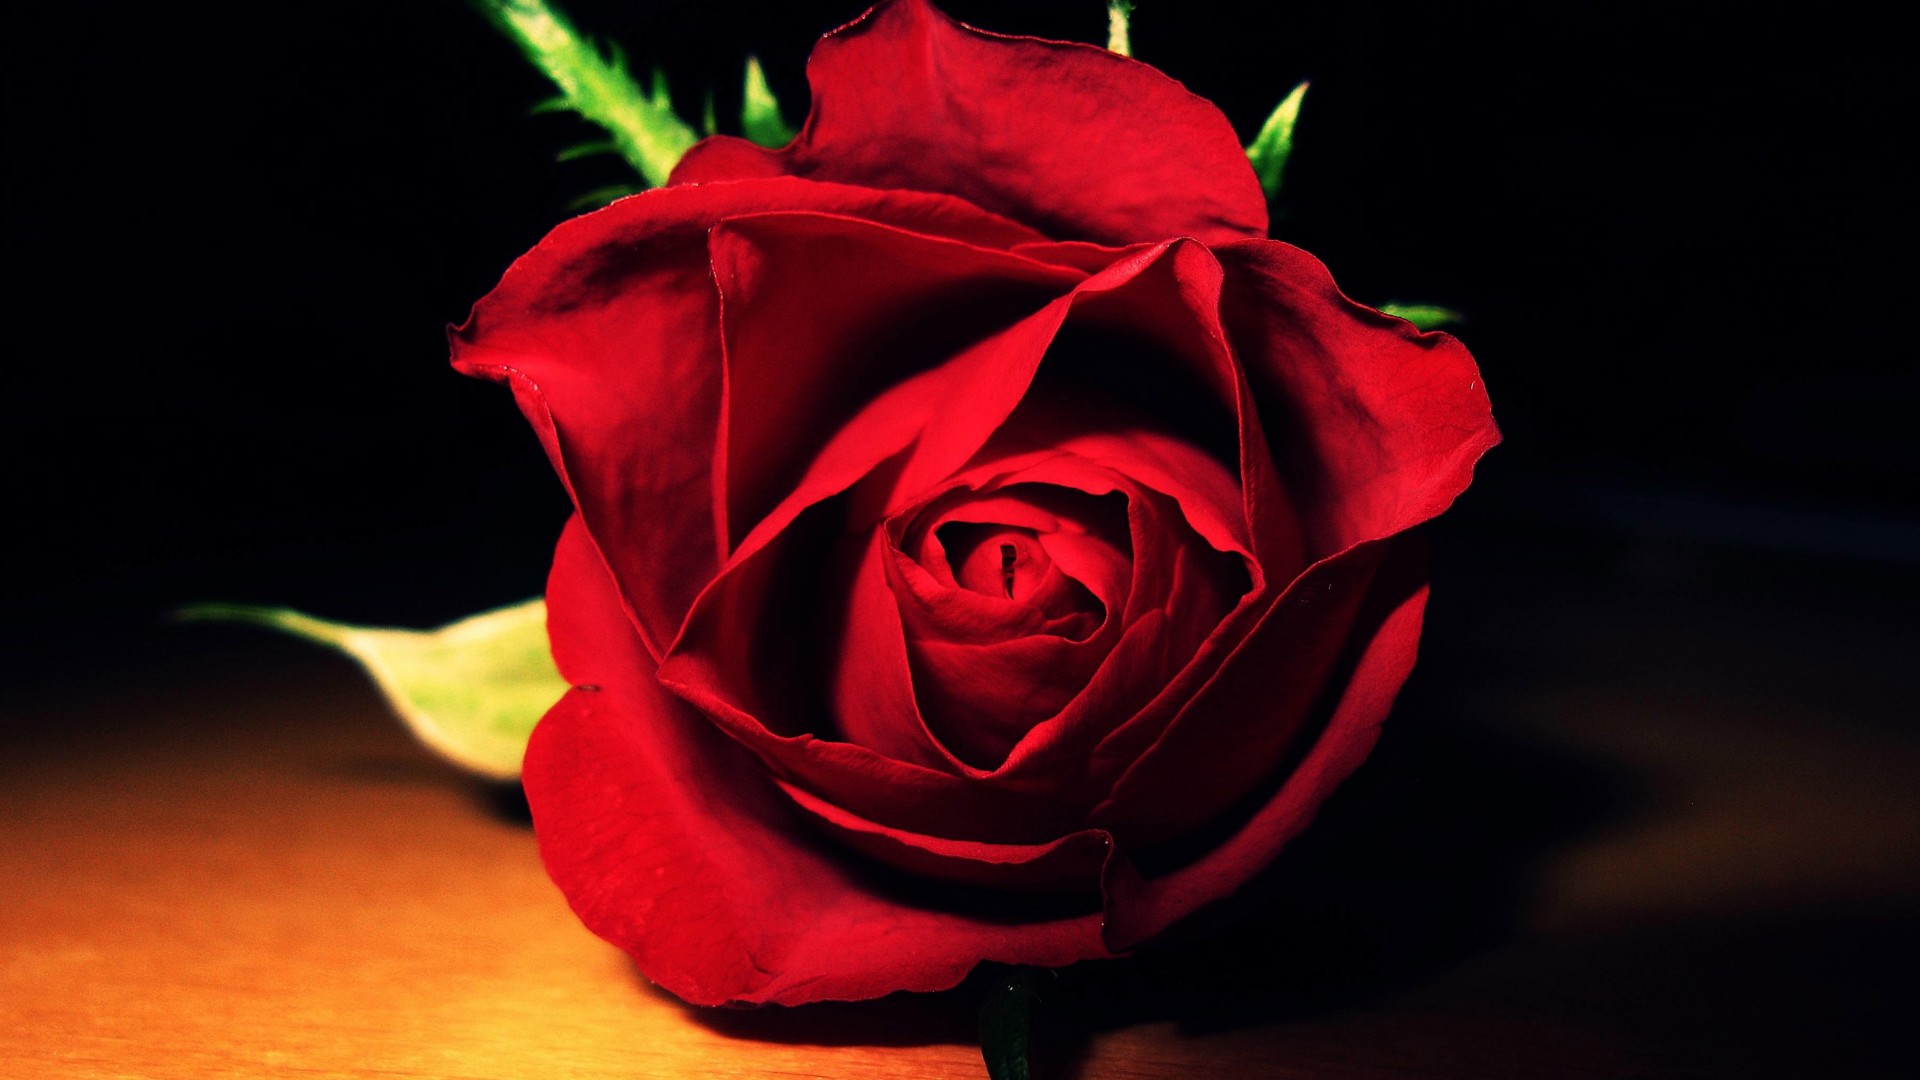 Red Rose Background Related Keywords amp Suggestions   Red